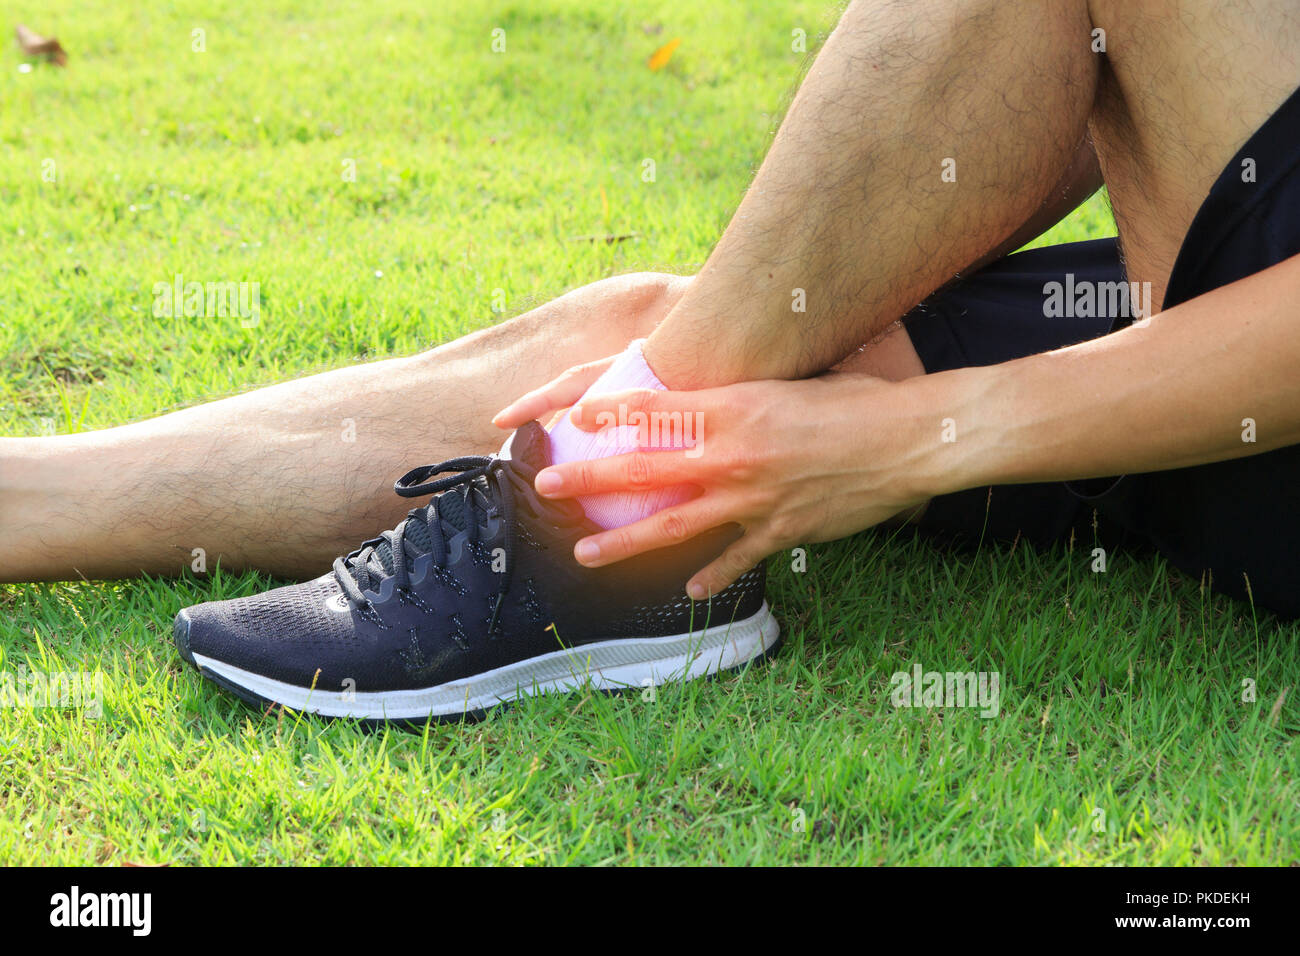 The man has hurt at the ankle / ankle hurt Stock Photo